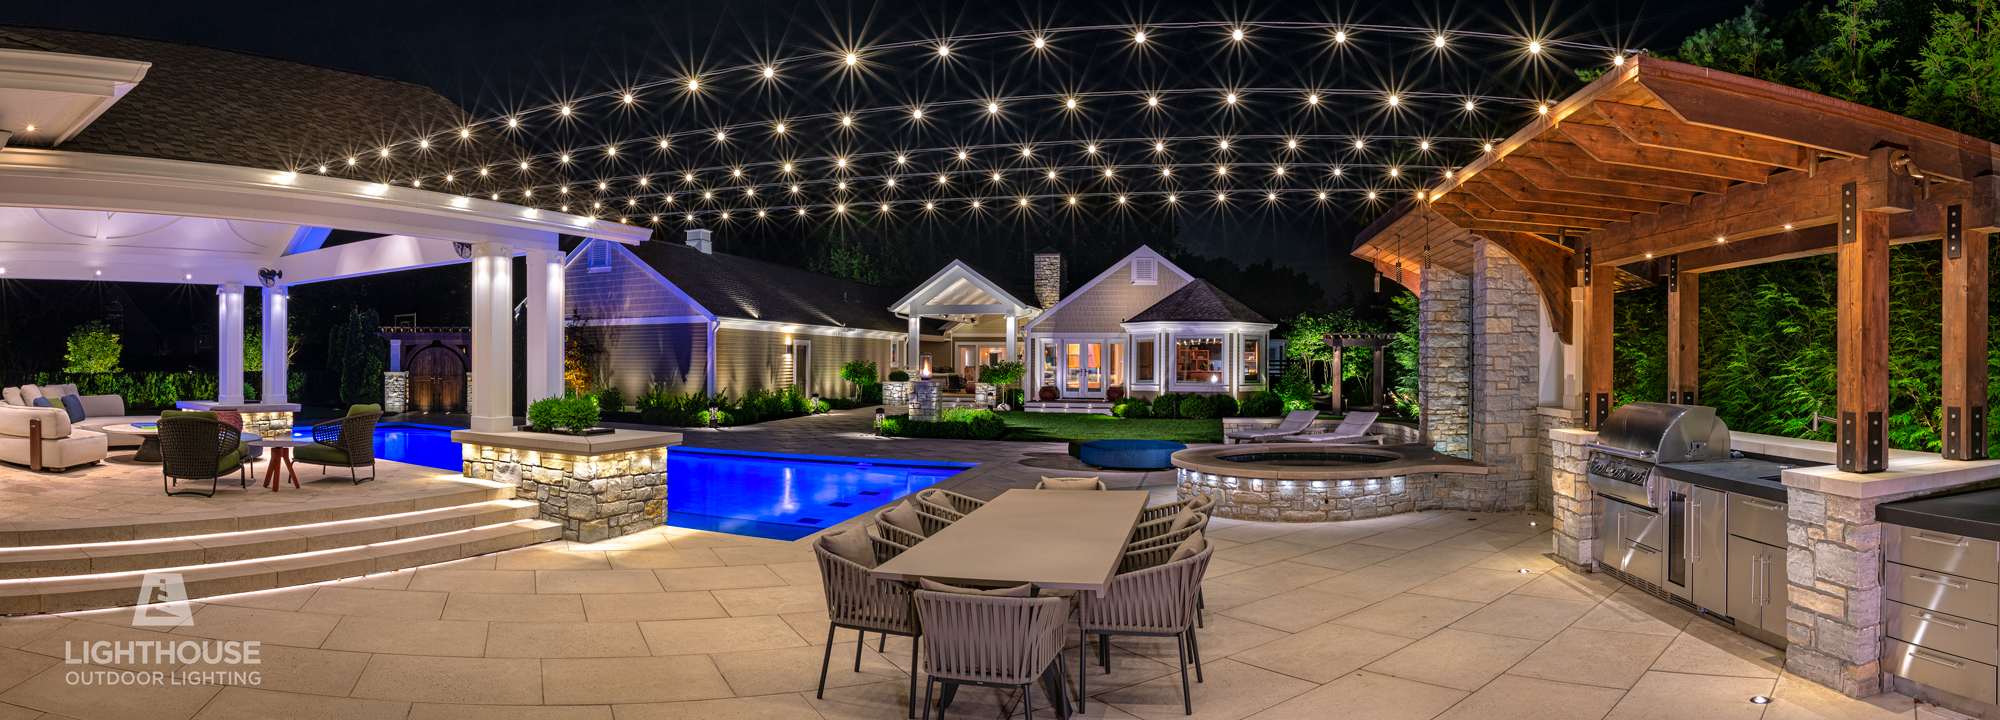 Patio String Lighting in Amory, MS